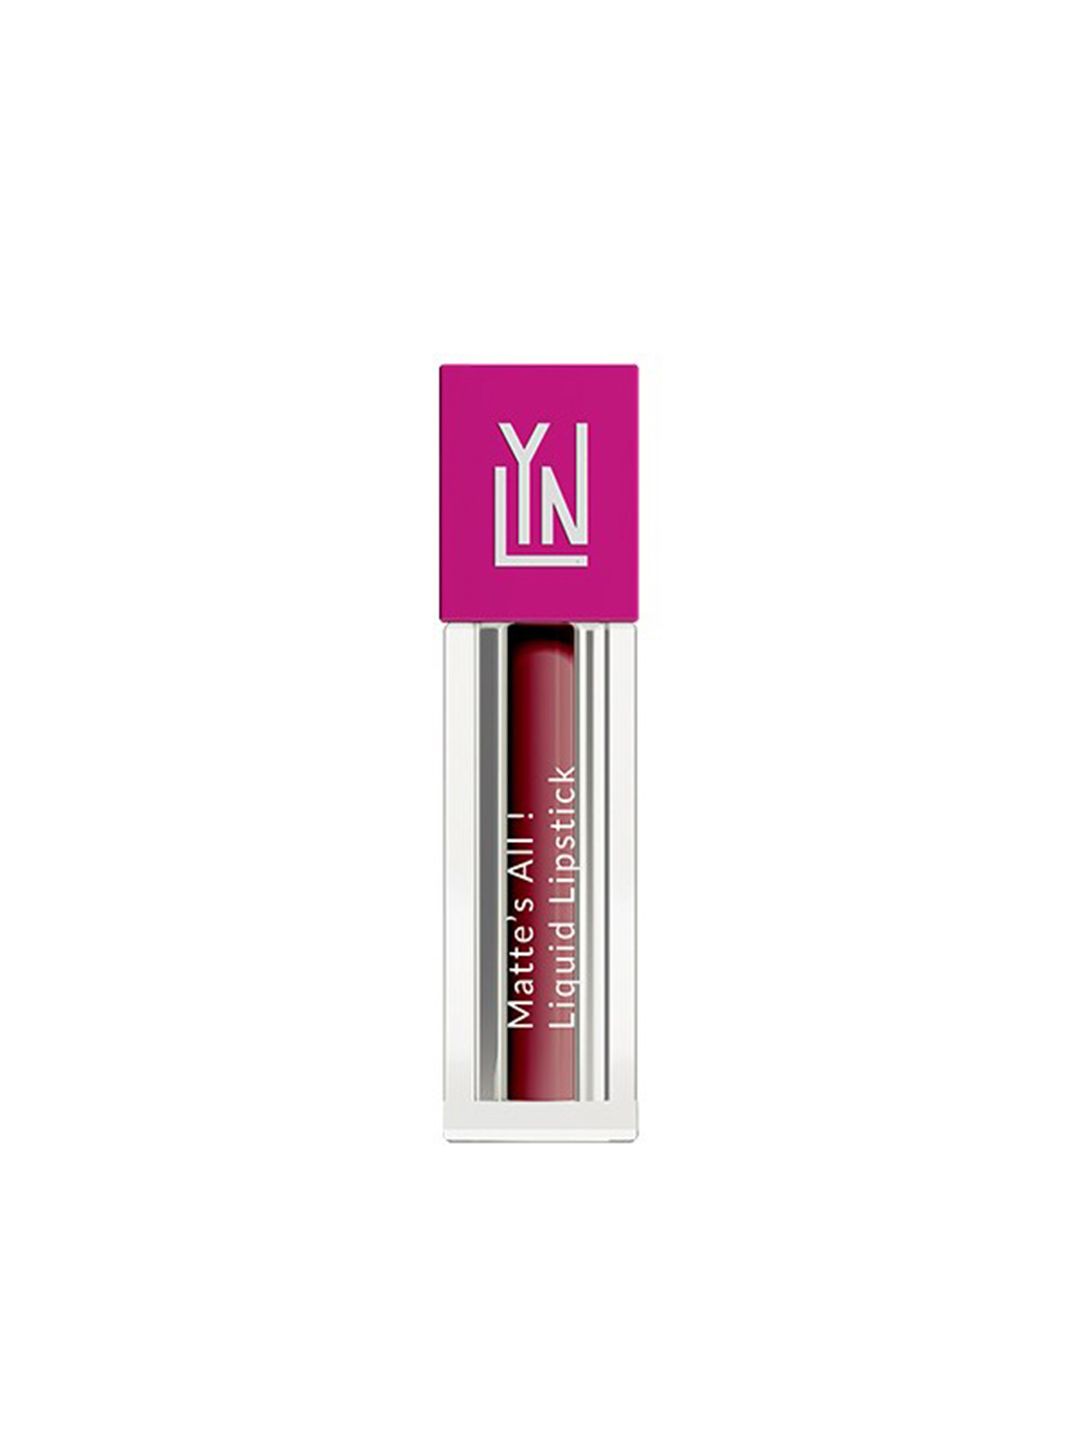 LYN LIVE YOUR NOW Matte Liquid Lipstick-Good Mauve 1ml Price in India